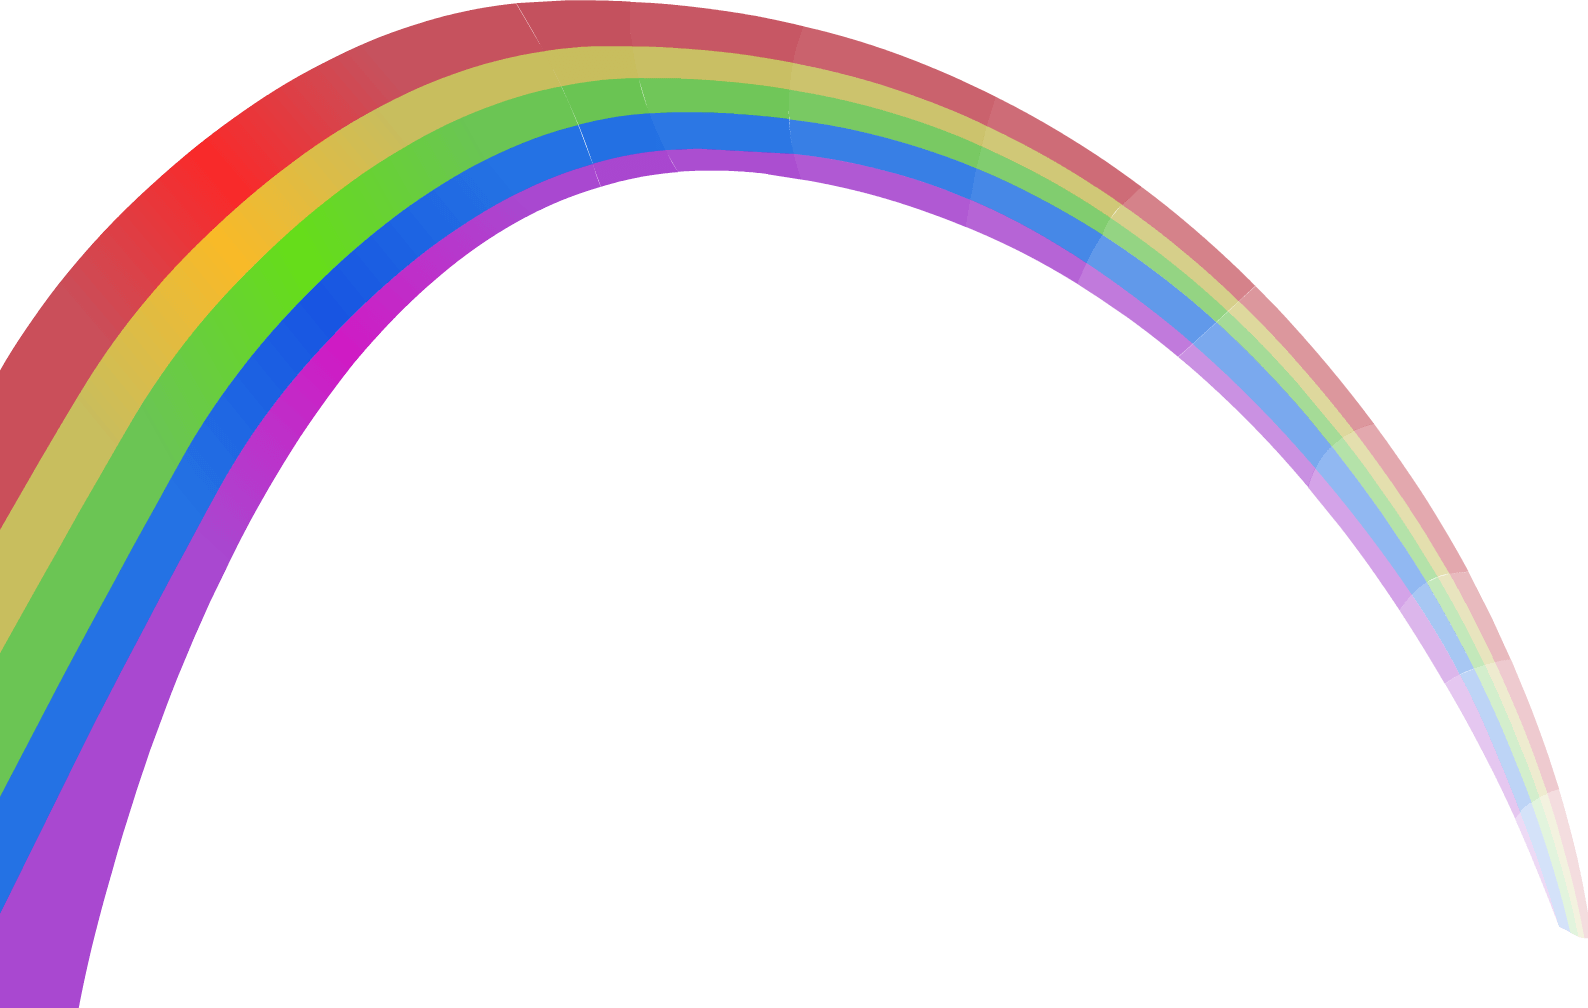 Rainbow Png Image PNG Image